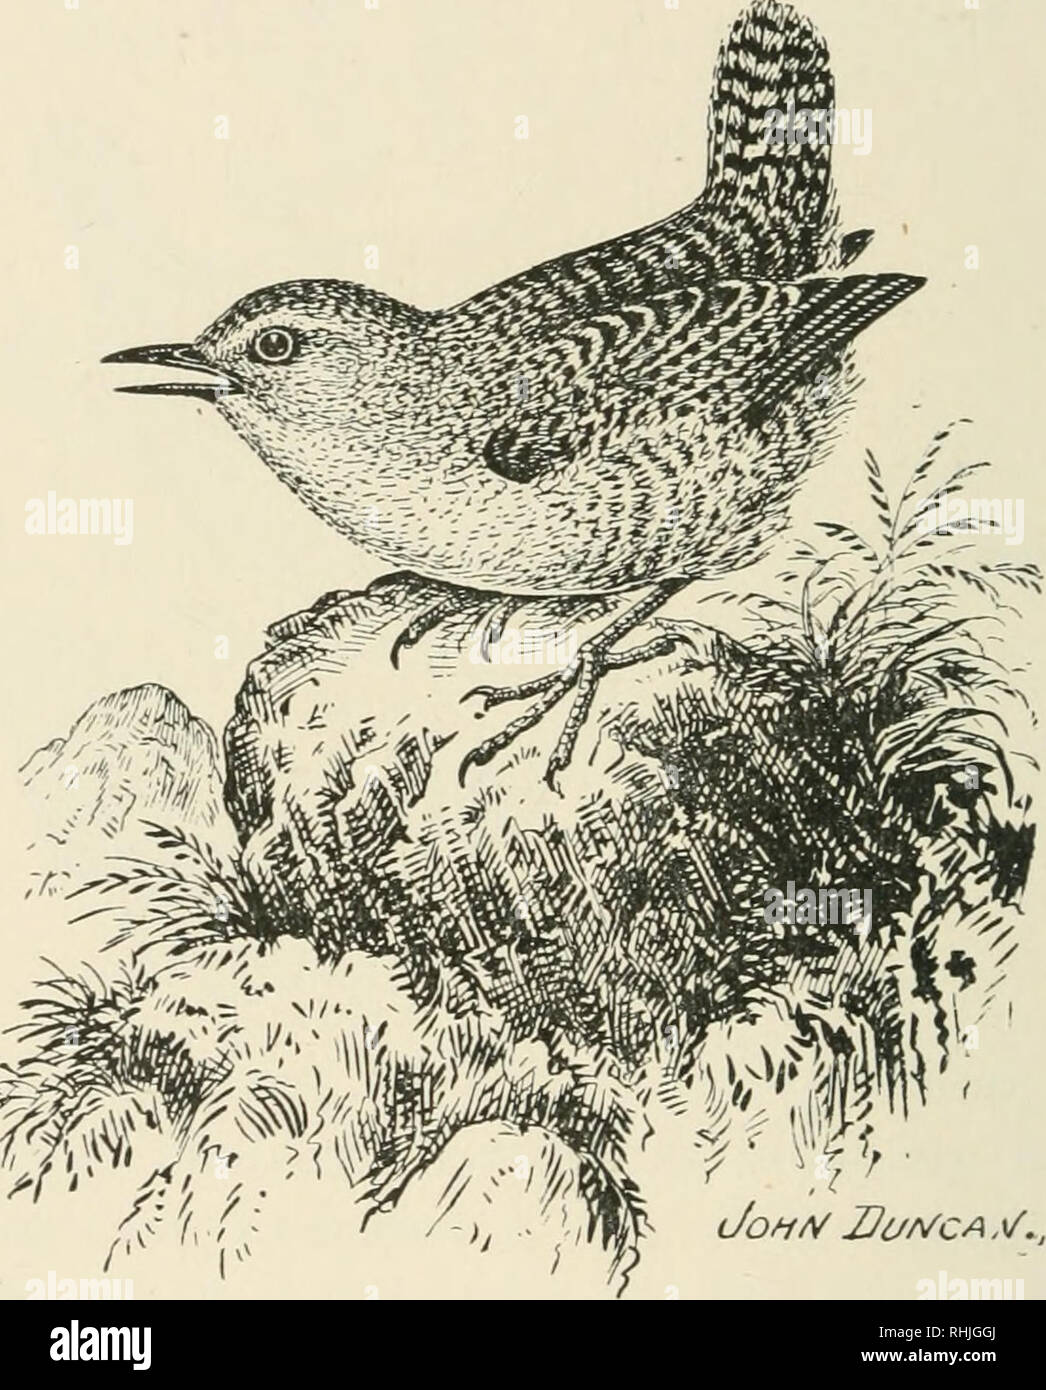 . Birds of the British Isles. Birds -- Great Britain; Birds -- Ireland. I30 BIRDS OF THE BRITISH ISLES. St Ikilba Mrcn.. JofiAf Ui/r/CA.V^, The St. Kilda Wren {Troglodytes hirtensis^ Seebohm) is a resident species on the islands of St. Kilda, Scotland. To Mr. Charles Dixon, the well-known naturalist, is due the honour of having brought from St. Kilda the speci- mens originally described by the late Henry Seebohm. The adult male closely resembles the common wren, but is superior in size, and the feet are much stronger and larger.. Please note that these images are extracted from scanned page im Stock Photo